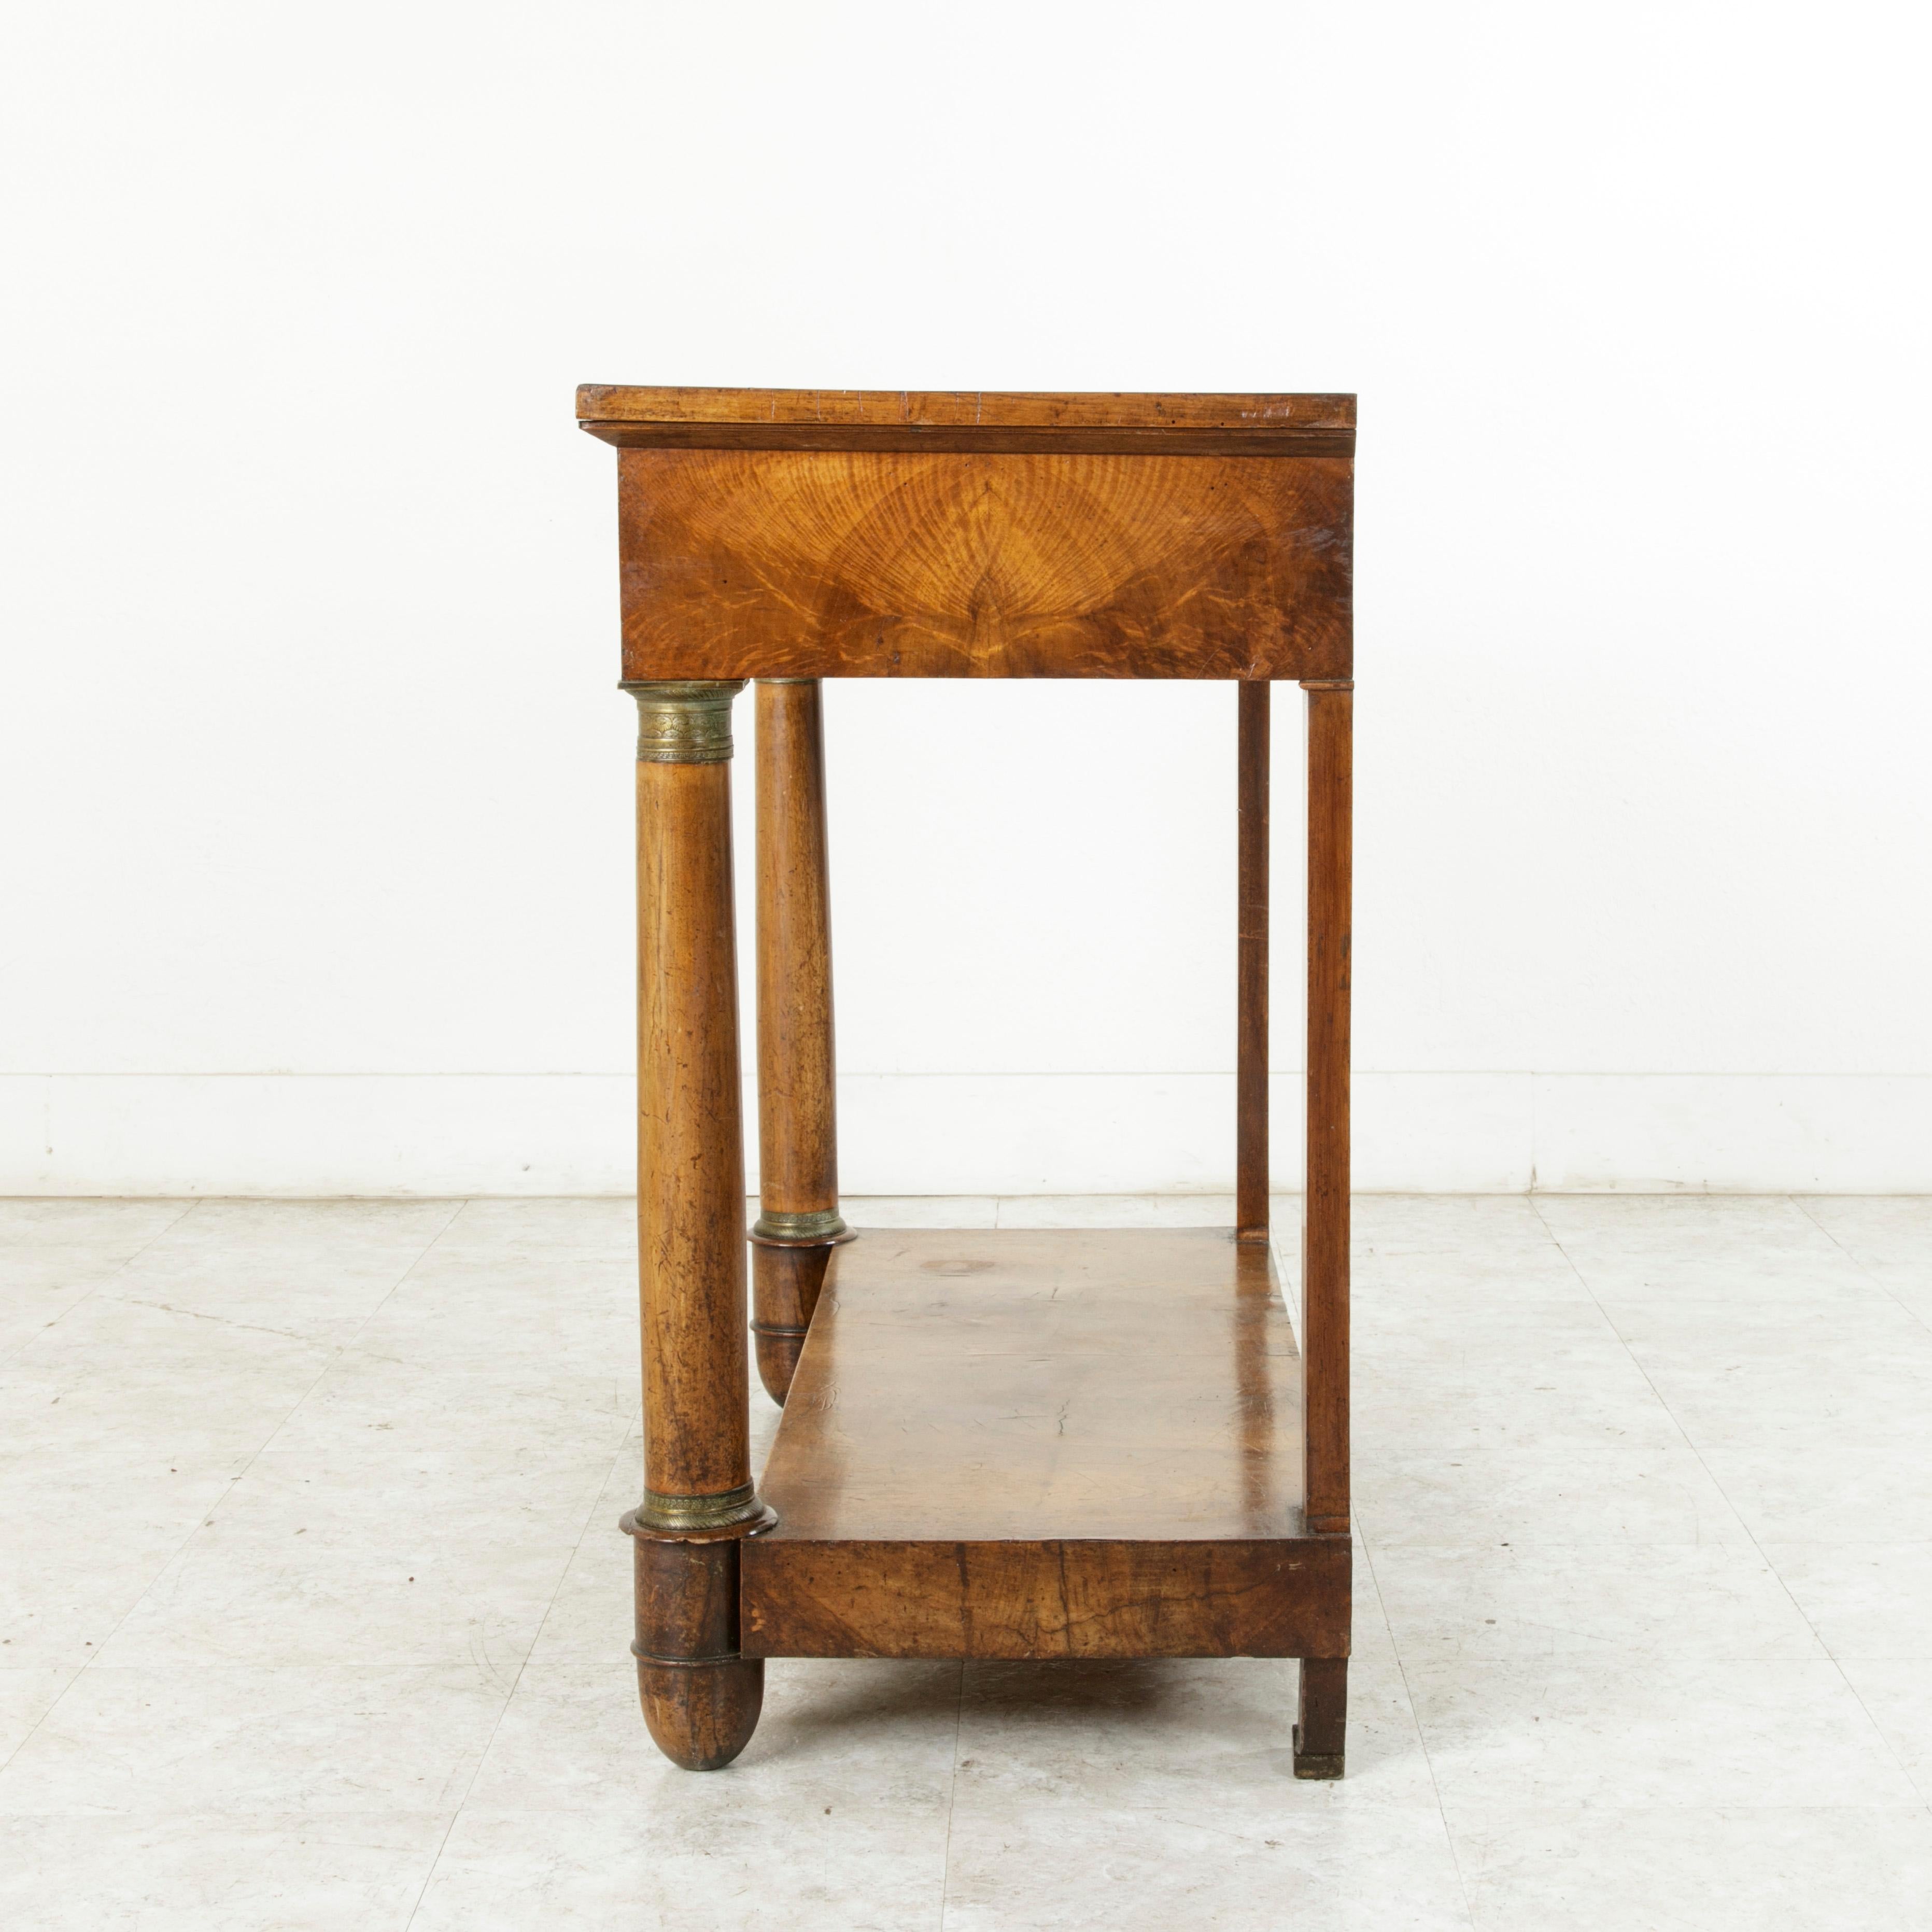 Early 19th Century, French Empire Period Burl Walnut Console Table with Drawer 1